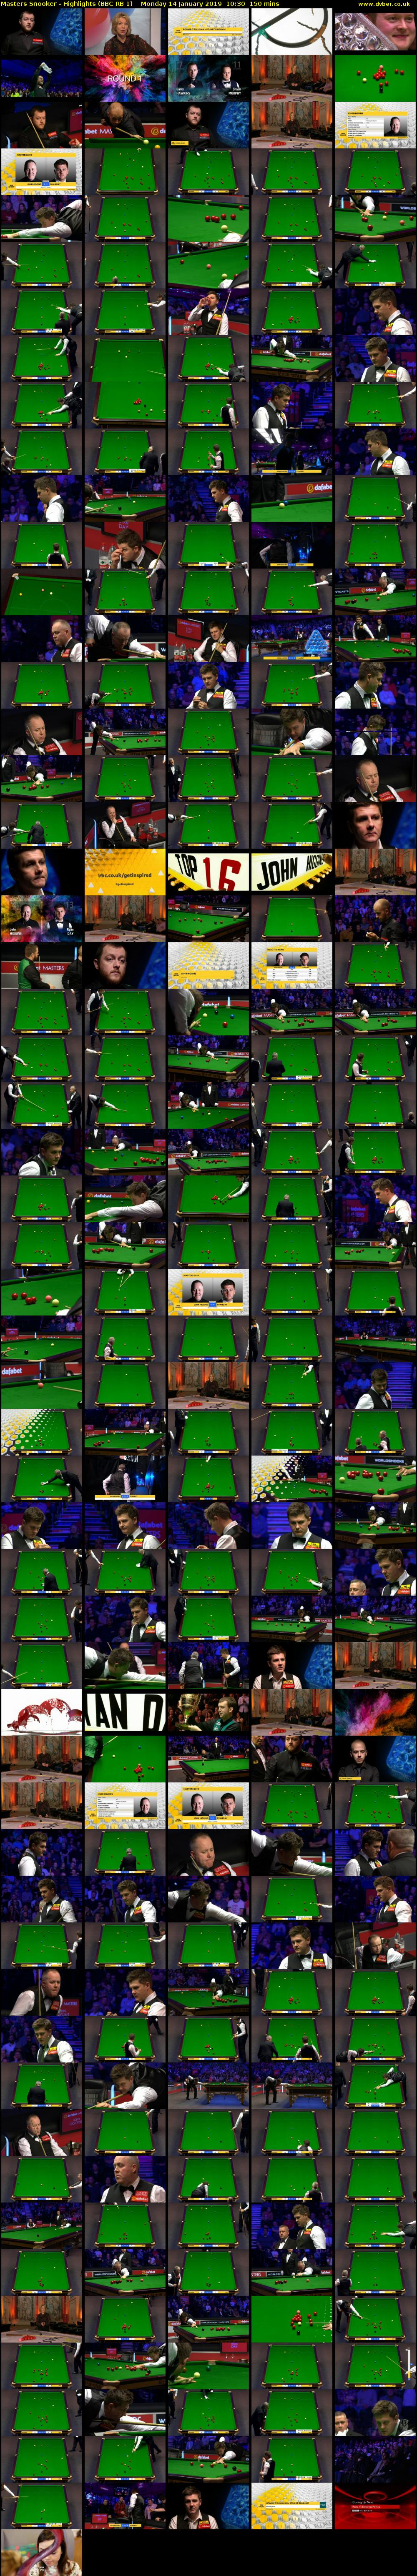 Masters Snooker - Highlights (BBC RB 1) Monday 14 January 2019 10:30 - 13:00